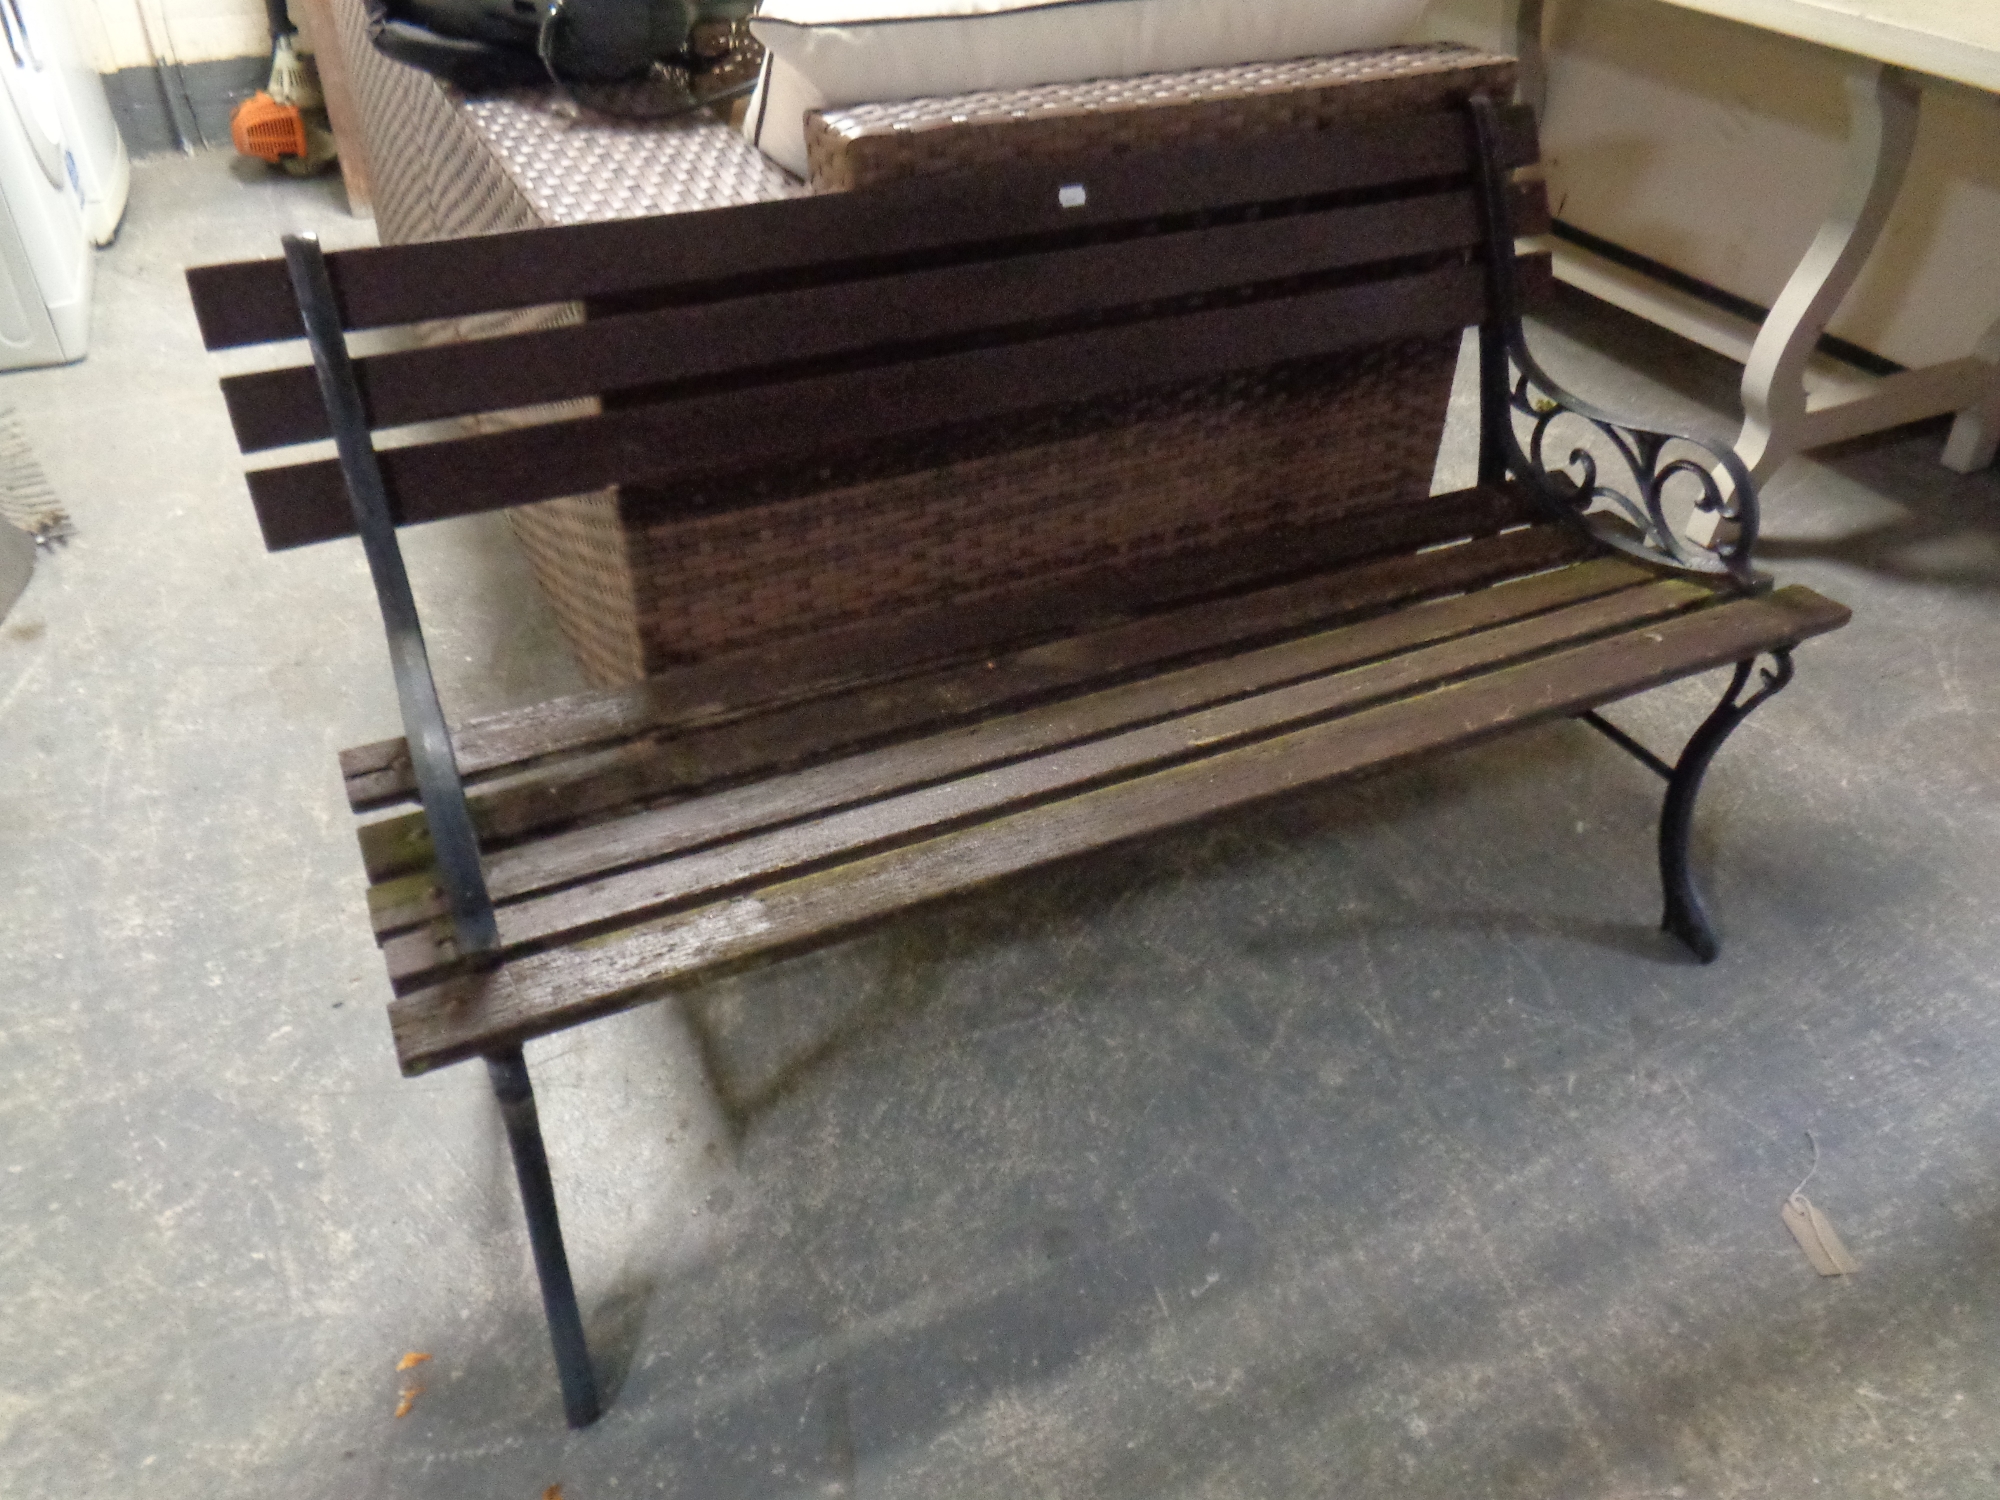 A wooden slatted cast iron-ended garden bench